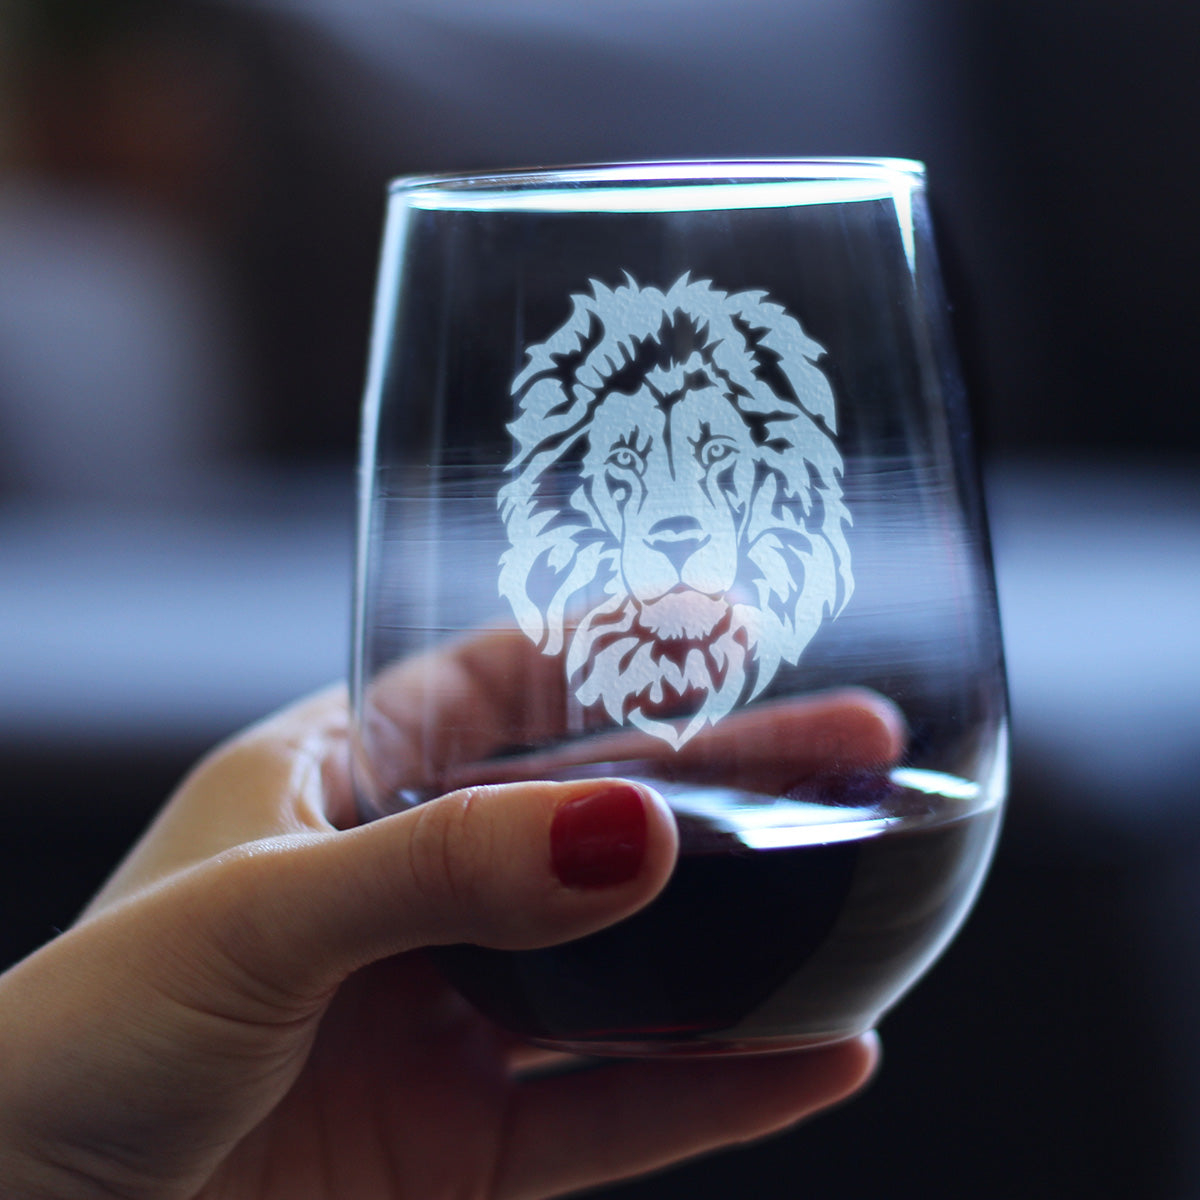 Lion Stemless Wine Glass - Fun Safari Themed Decor and Gifts for Lovers of African Wild Animals - Large 17 Oz Glasses